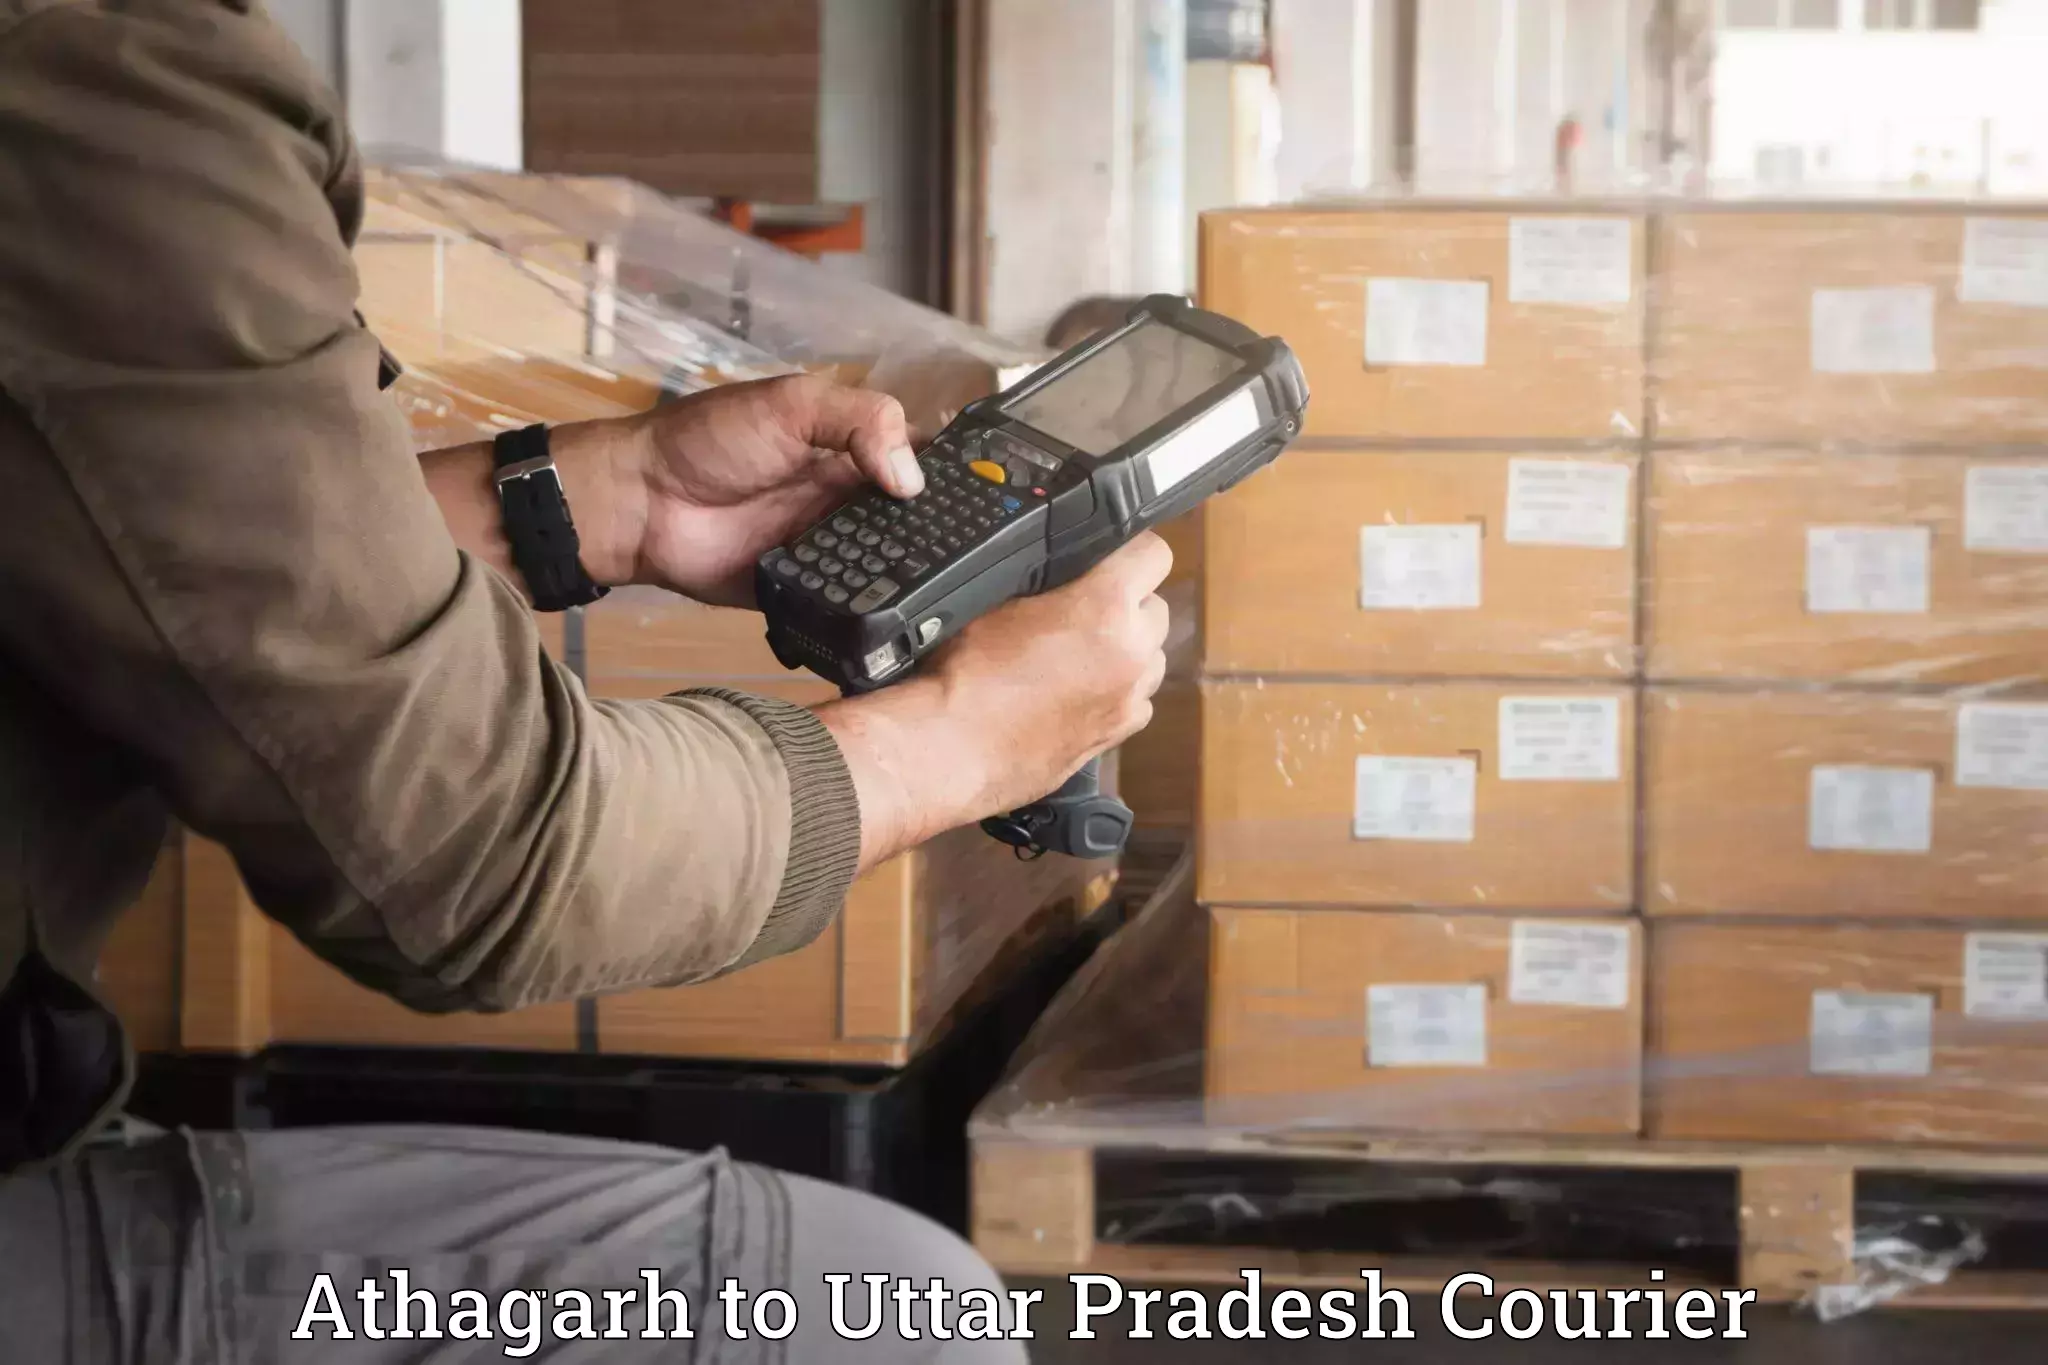 Full-service movers in Athagarh to Khalilabad